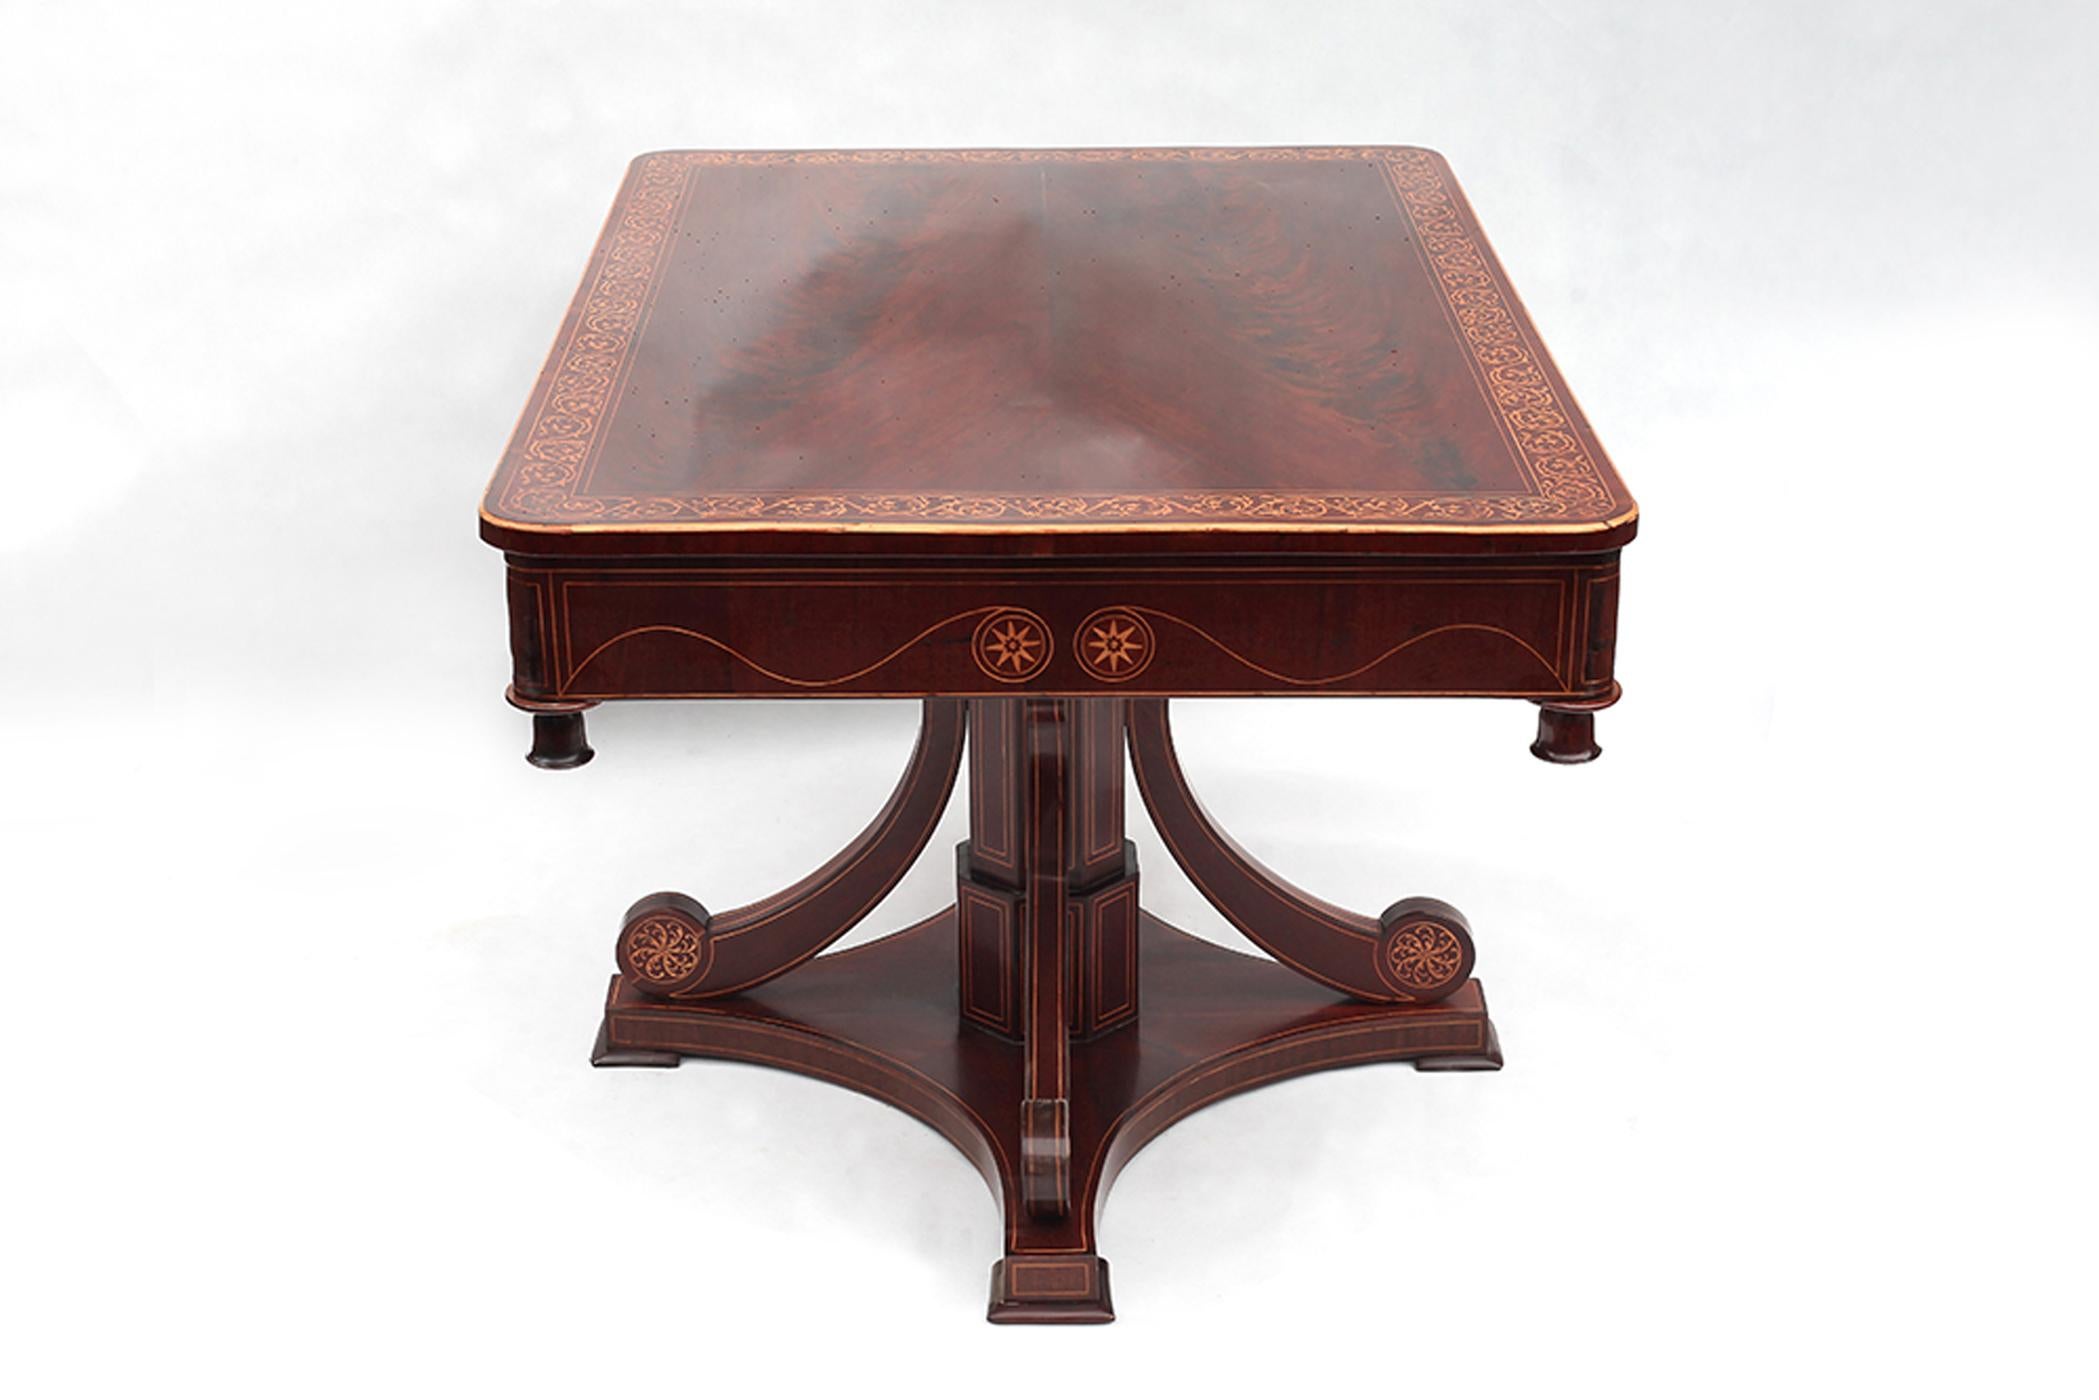 Hello,
We would like to offer you this fine and rare mahogany Biedermeier suite consisting nine pieces. 

This suite of Continental Biedermeier (Northern Germany - circa 1825) mahogany dining room furniture including a rectangular table with